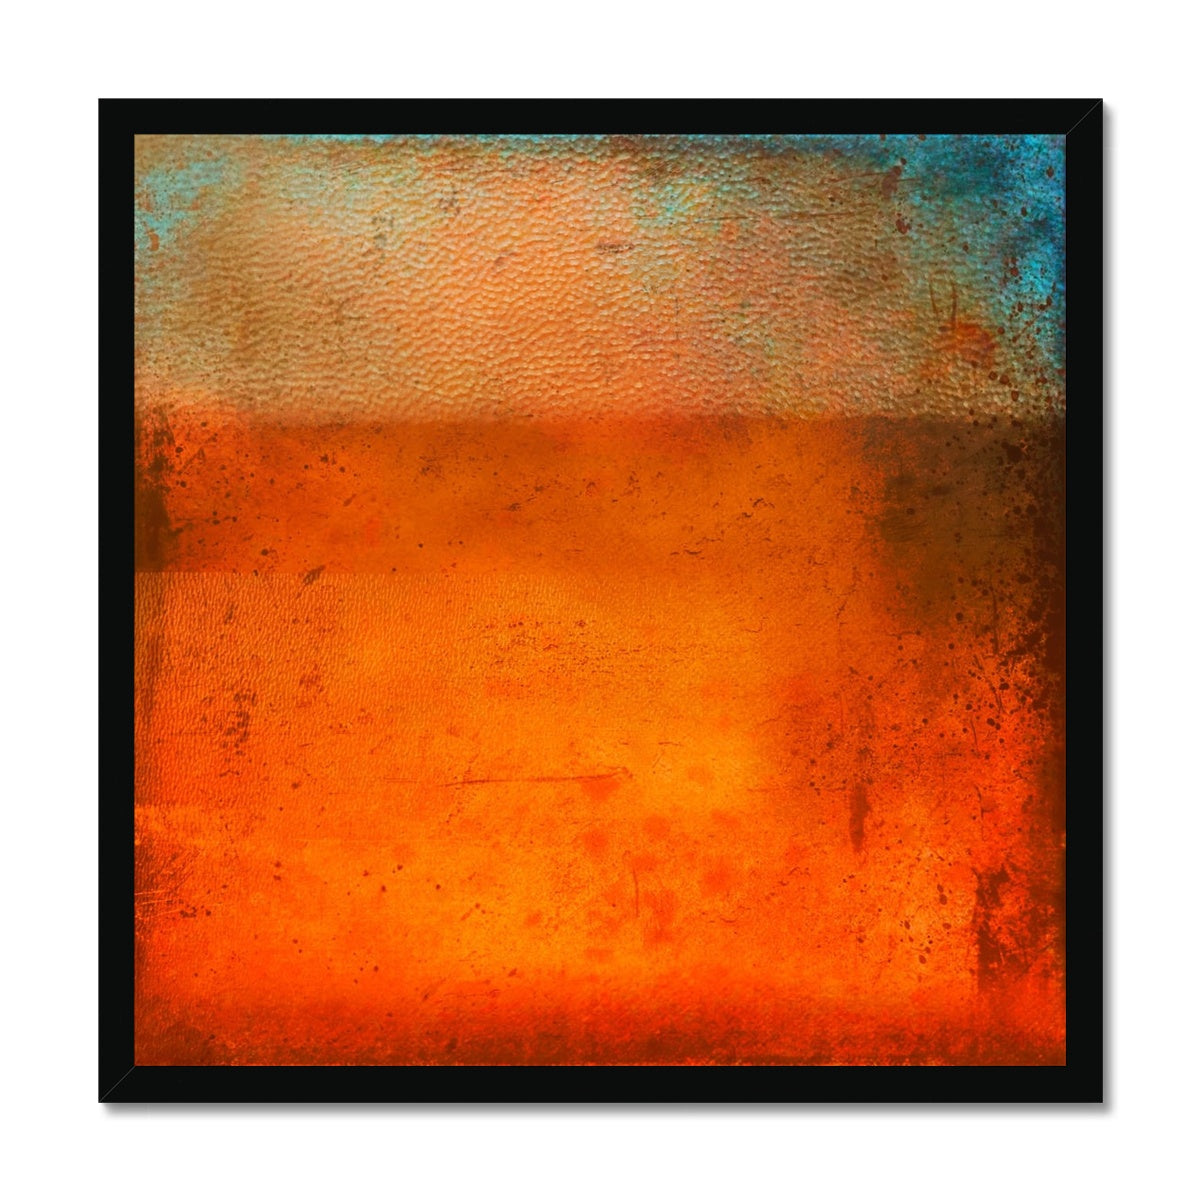 Sunset Horizon Abstract Painting | Framed Prints From Scotland-Framed Prints-Abstract & Impressionistic Art Gallery-20"x20"-Black Frame-Paintings, Prints, Homeware, Art Gifts From Scotland By Scottish Artist Kevin Hunter